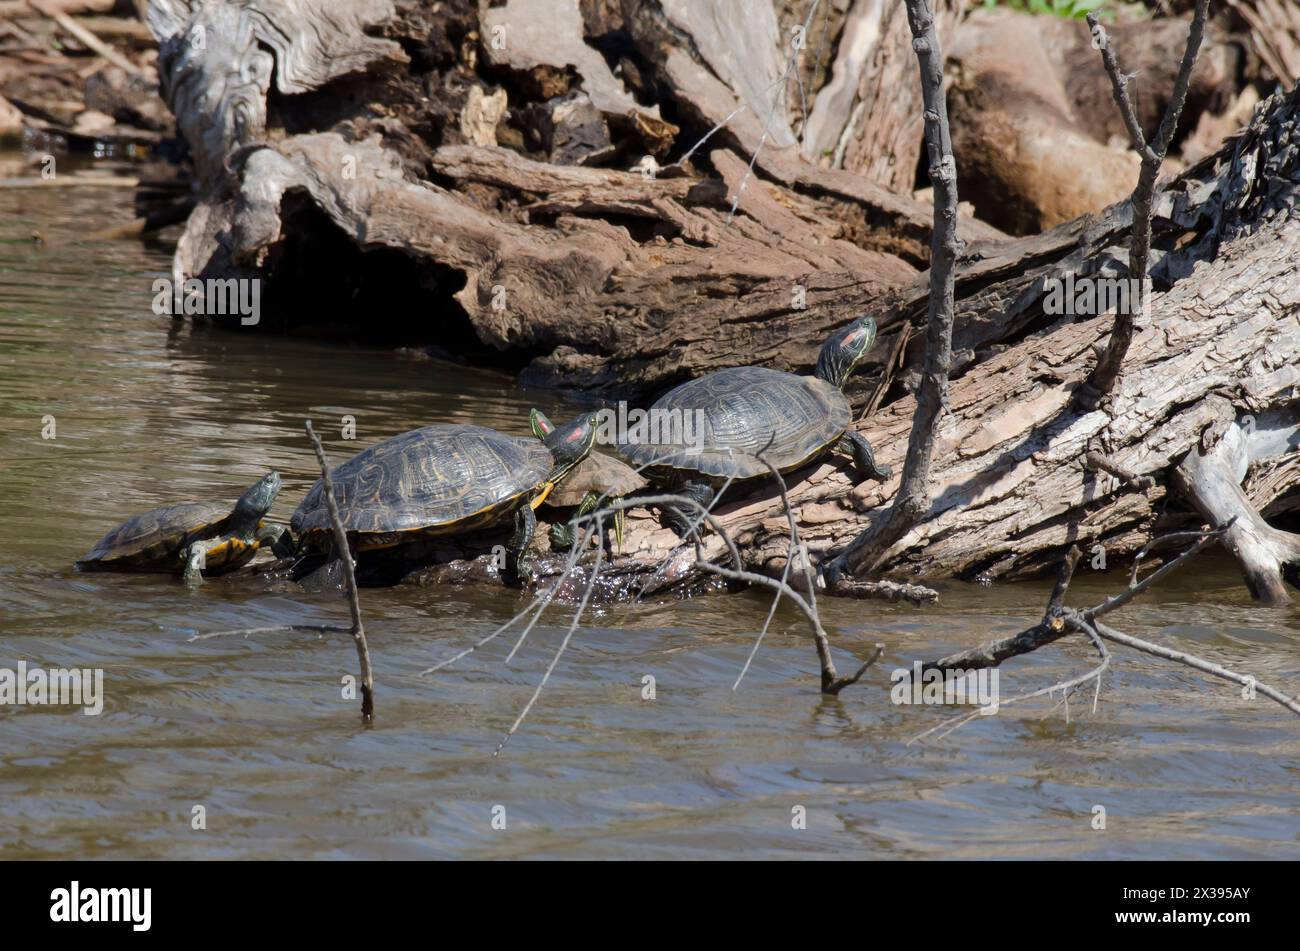 Red-eared sliders, Trachemys scripta elegans, and Eastern River Cooter, Pseudemys concinna concinna, basking on log Stock Photo